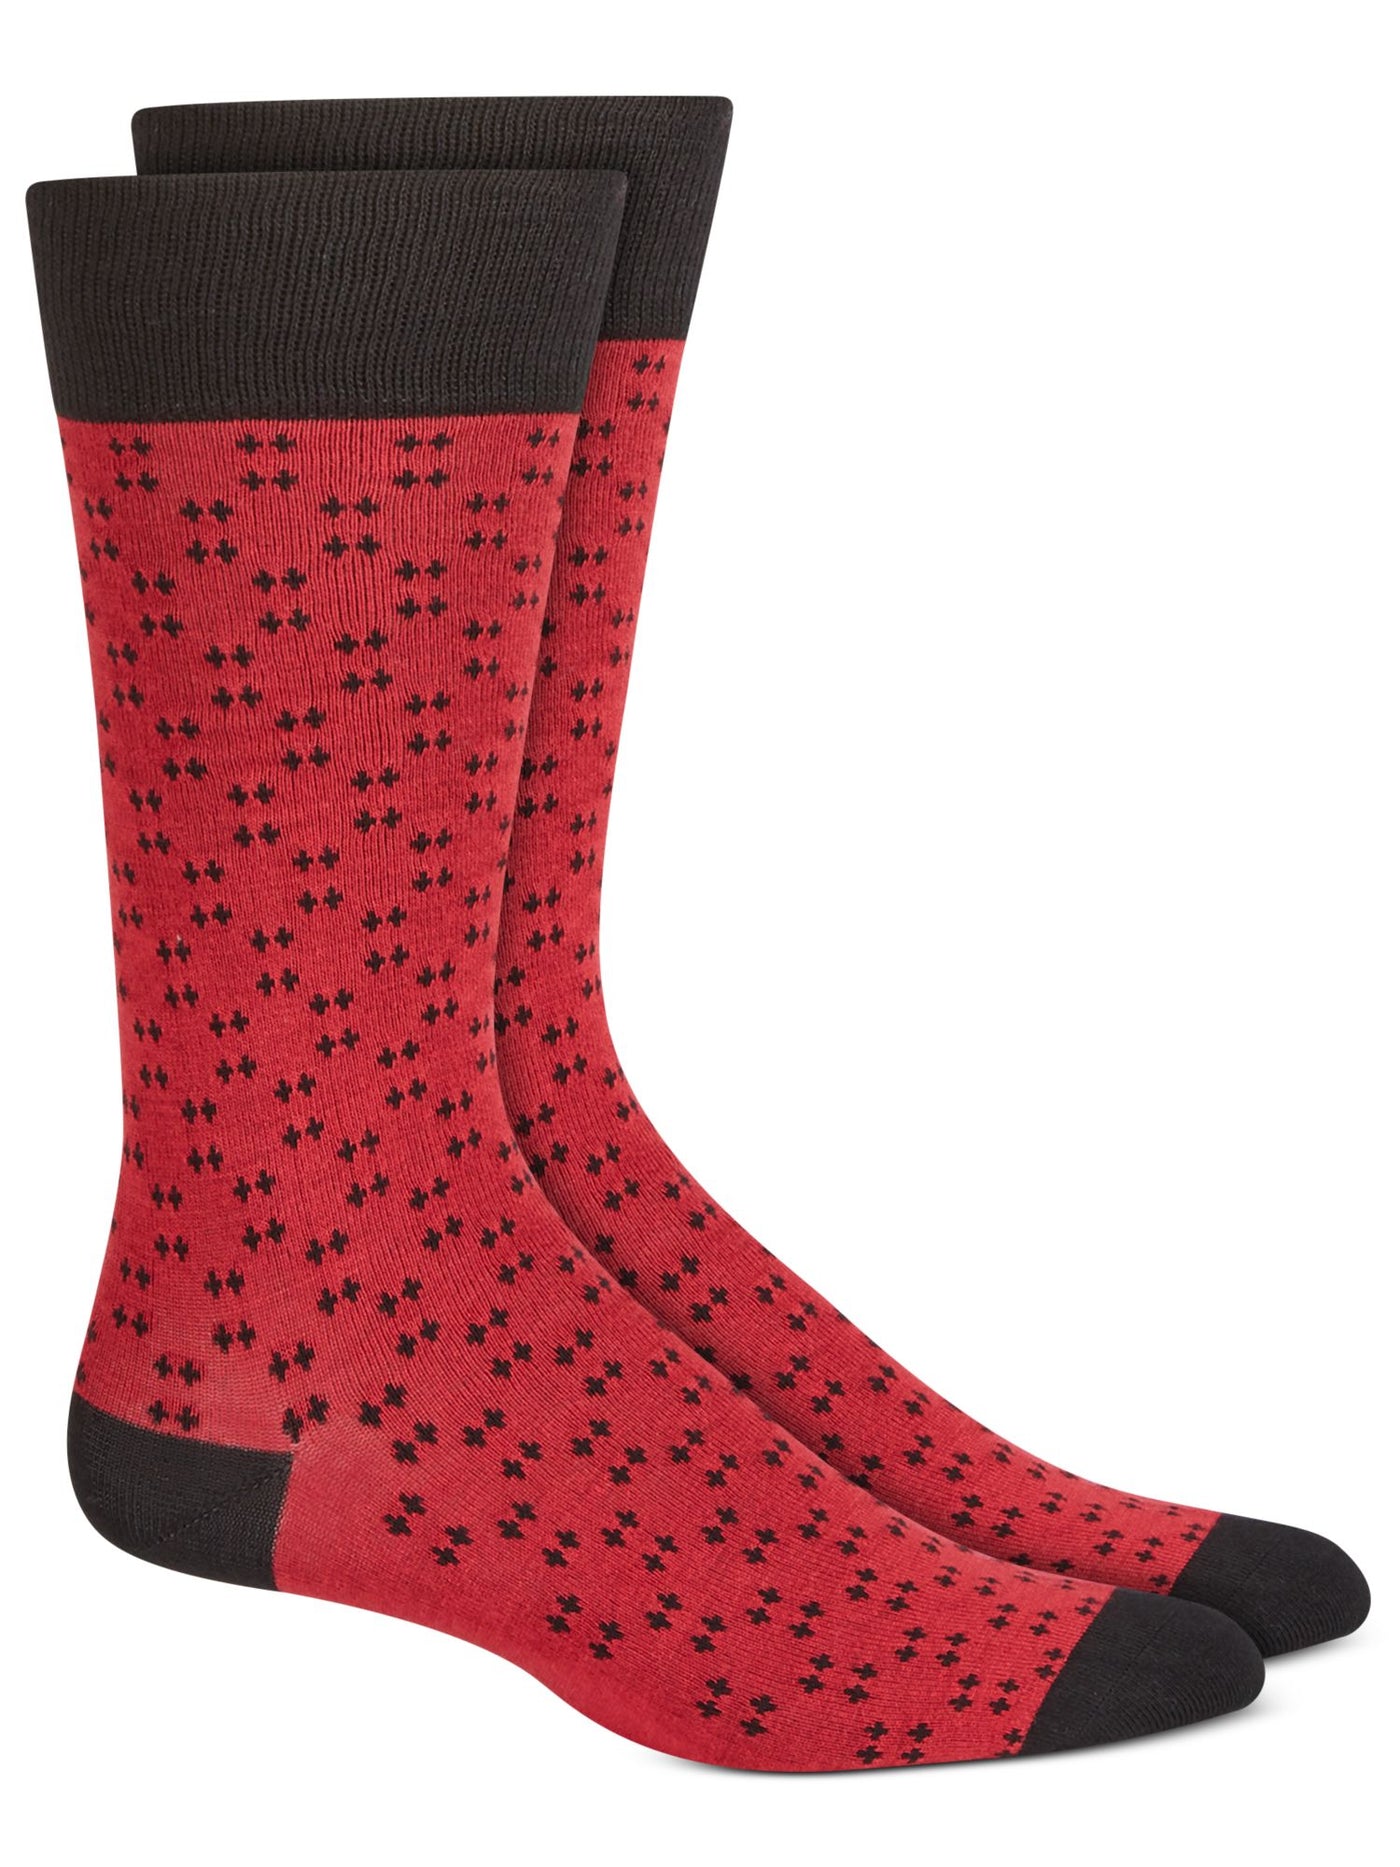 ALFATECH BY ALFANI Mens Red Rayon Printed Moisture Wicking Casual Crew Socks 7-12